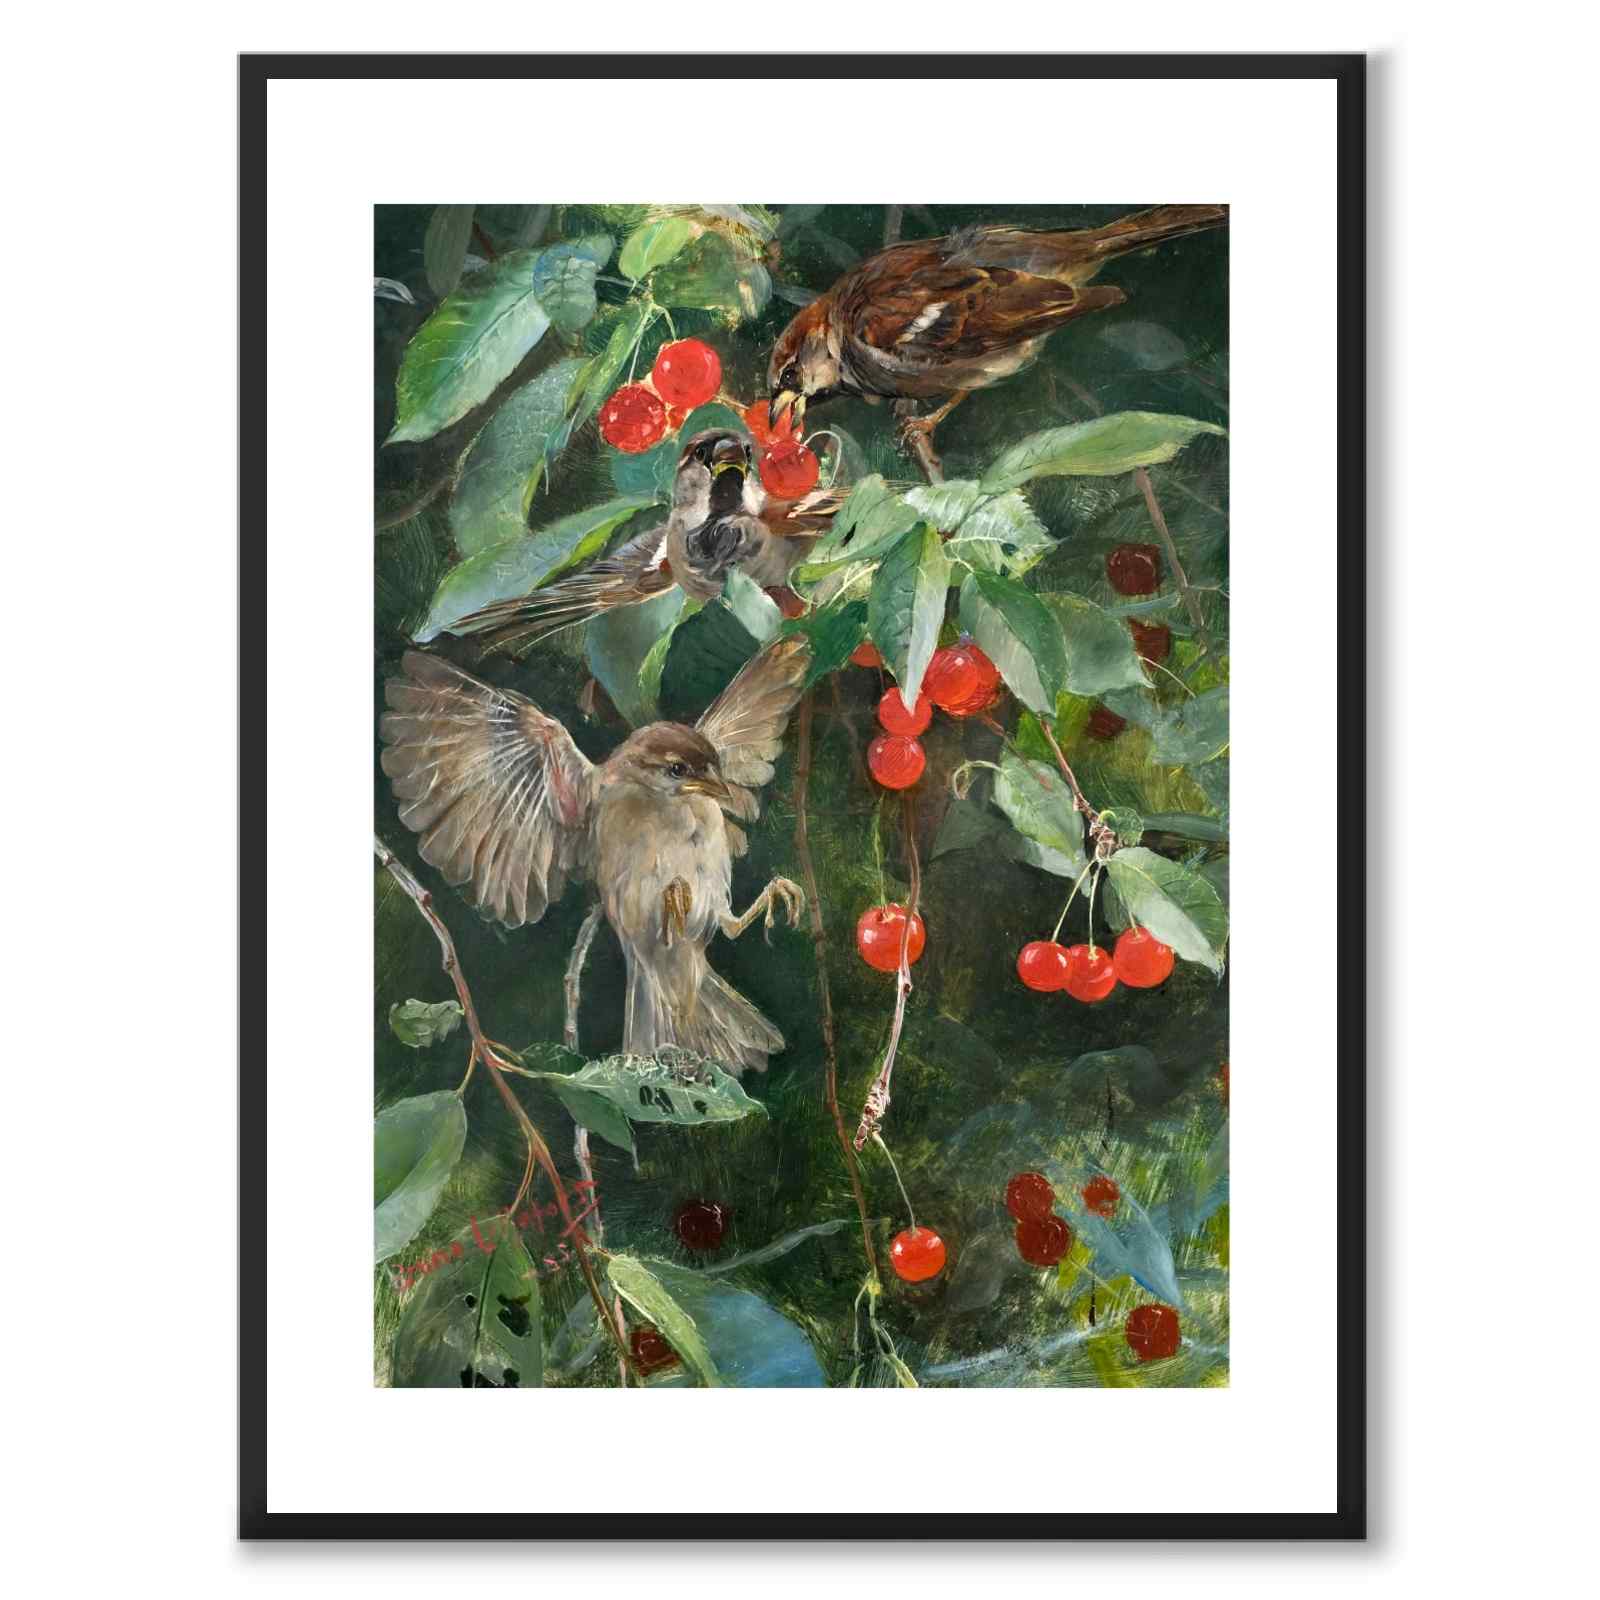 Sparrows in a Cherry Tree - Plakat 